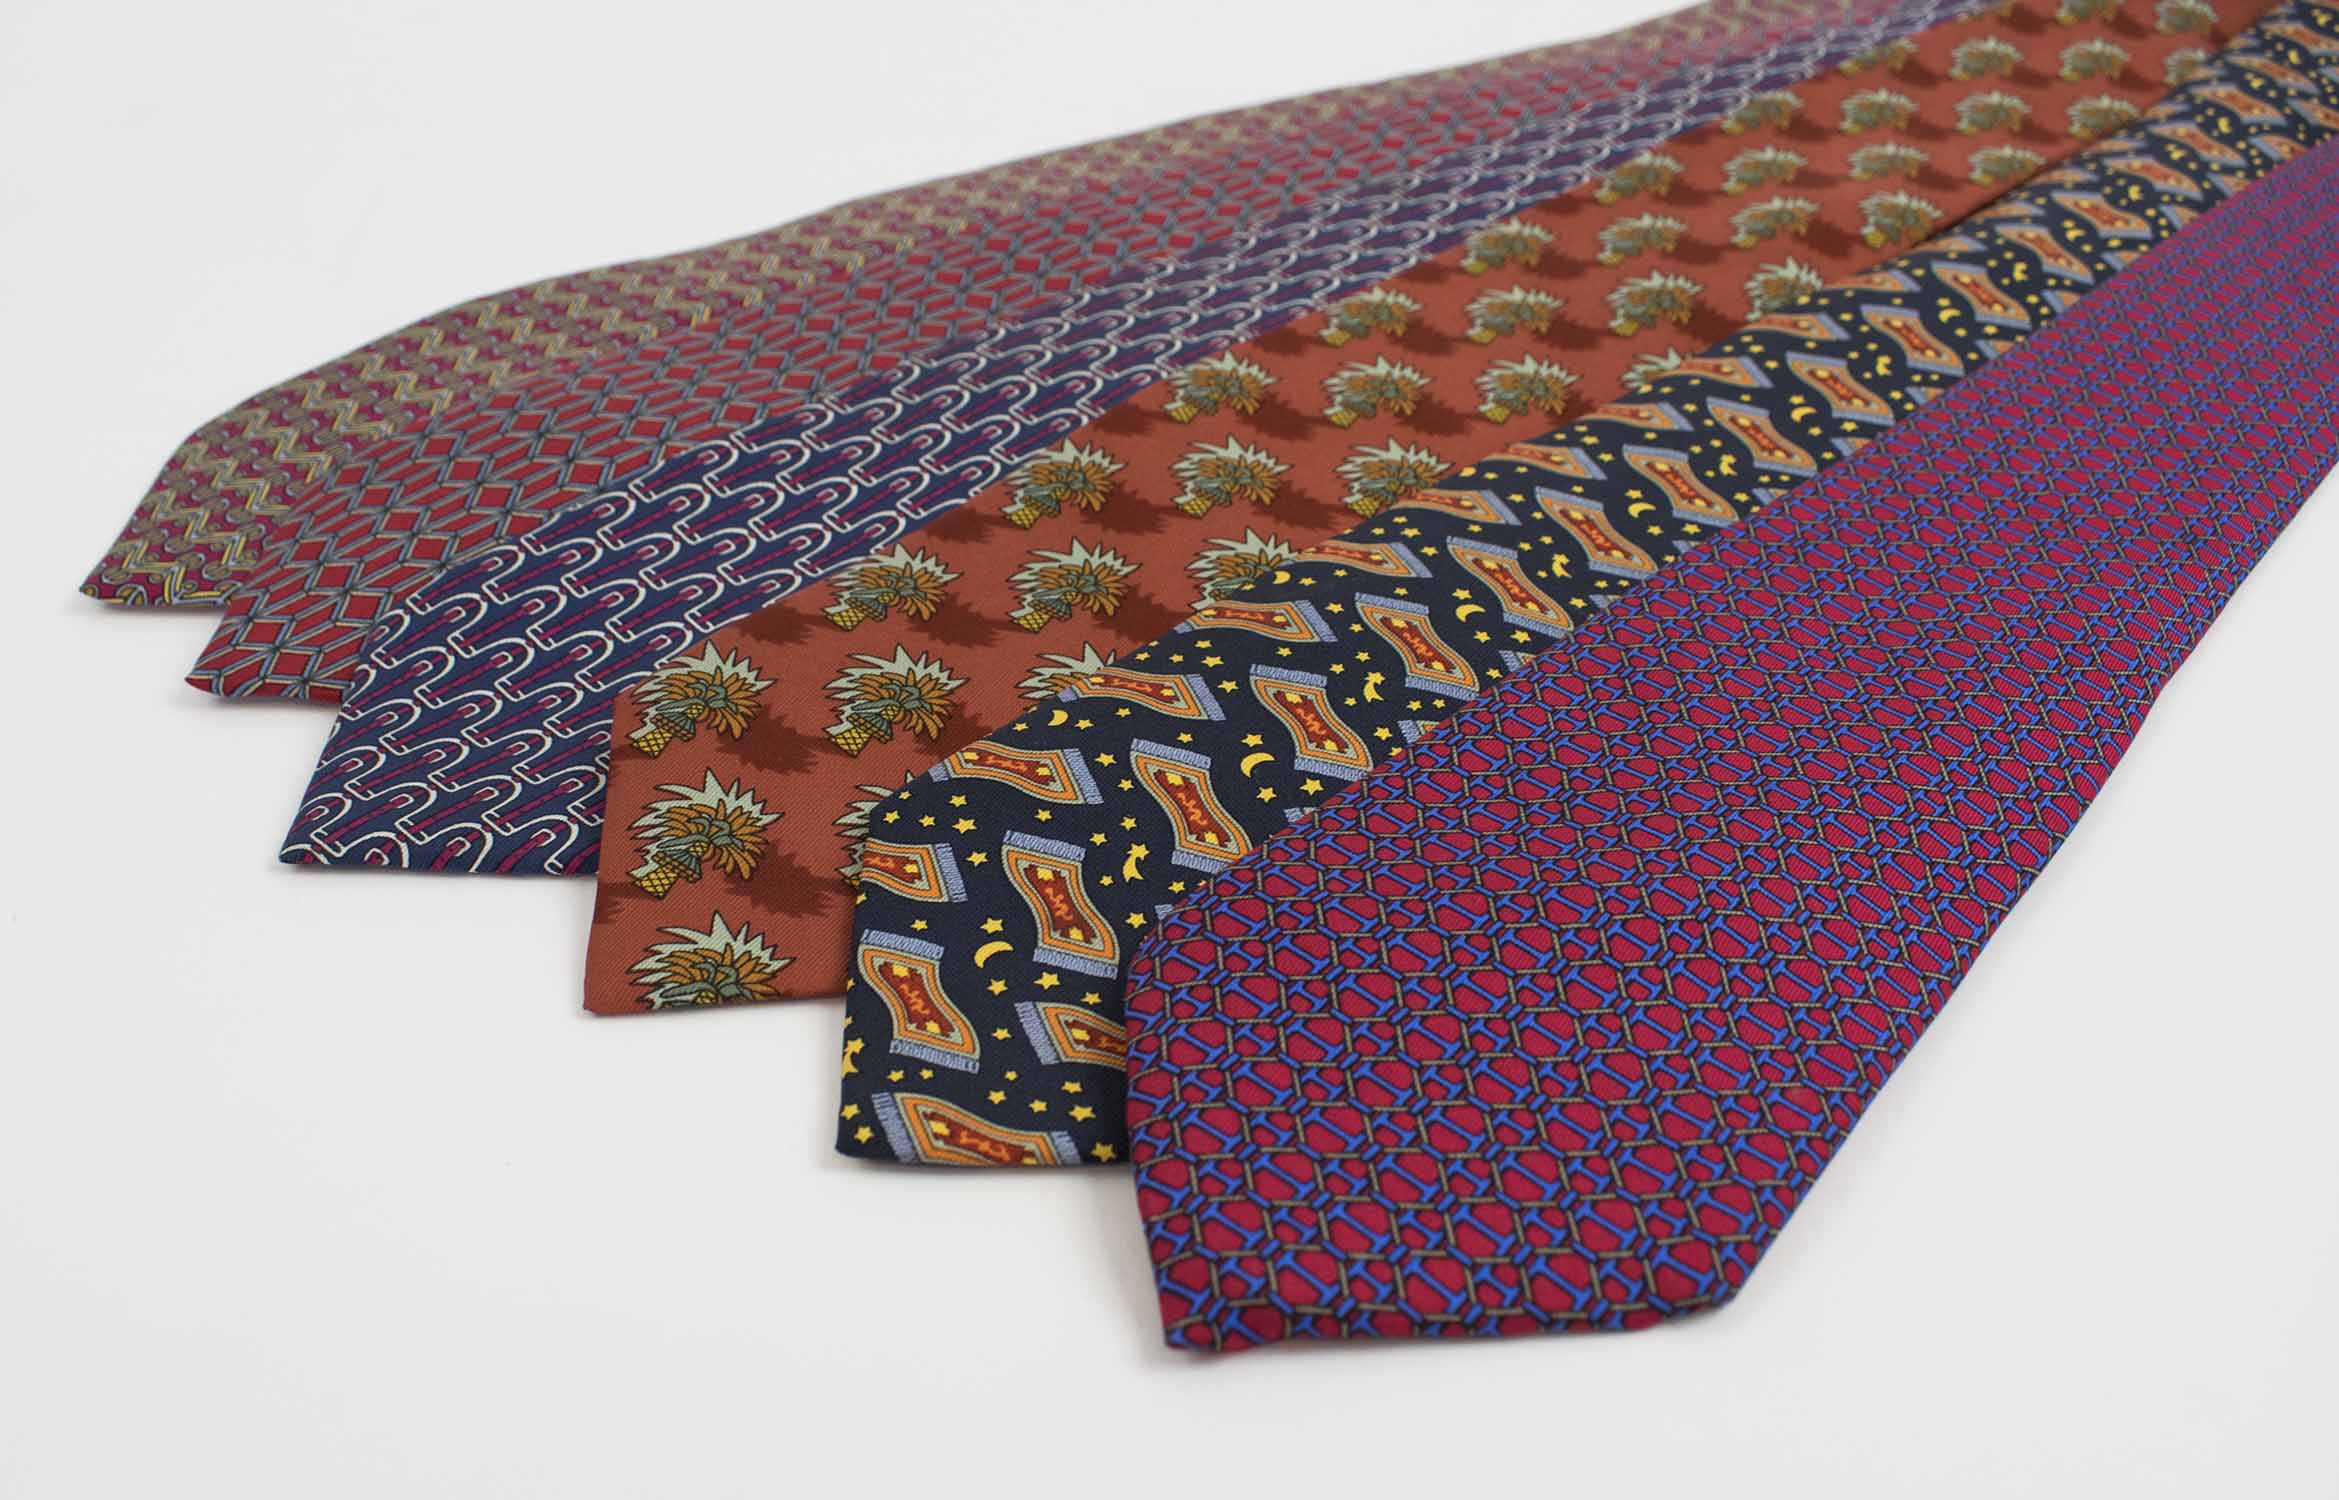 HERMÉS TIES, a collection of six patterned silk ties. (6)